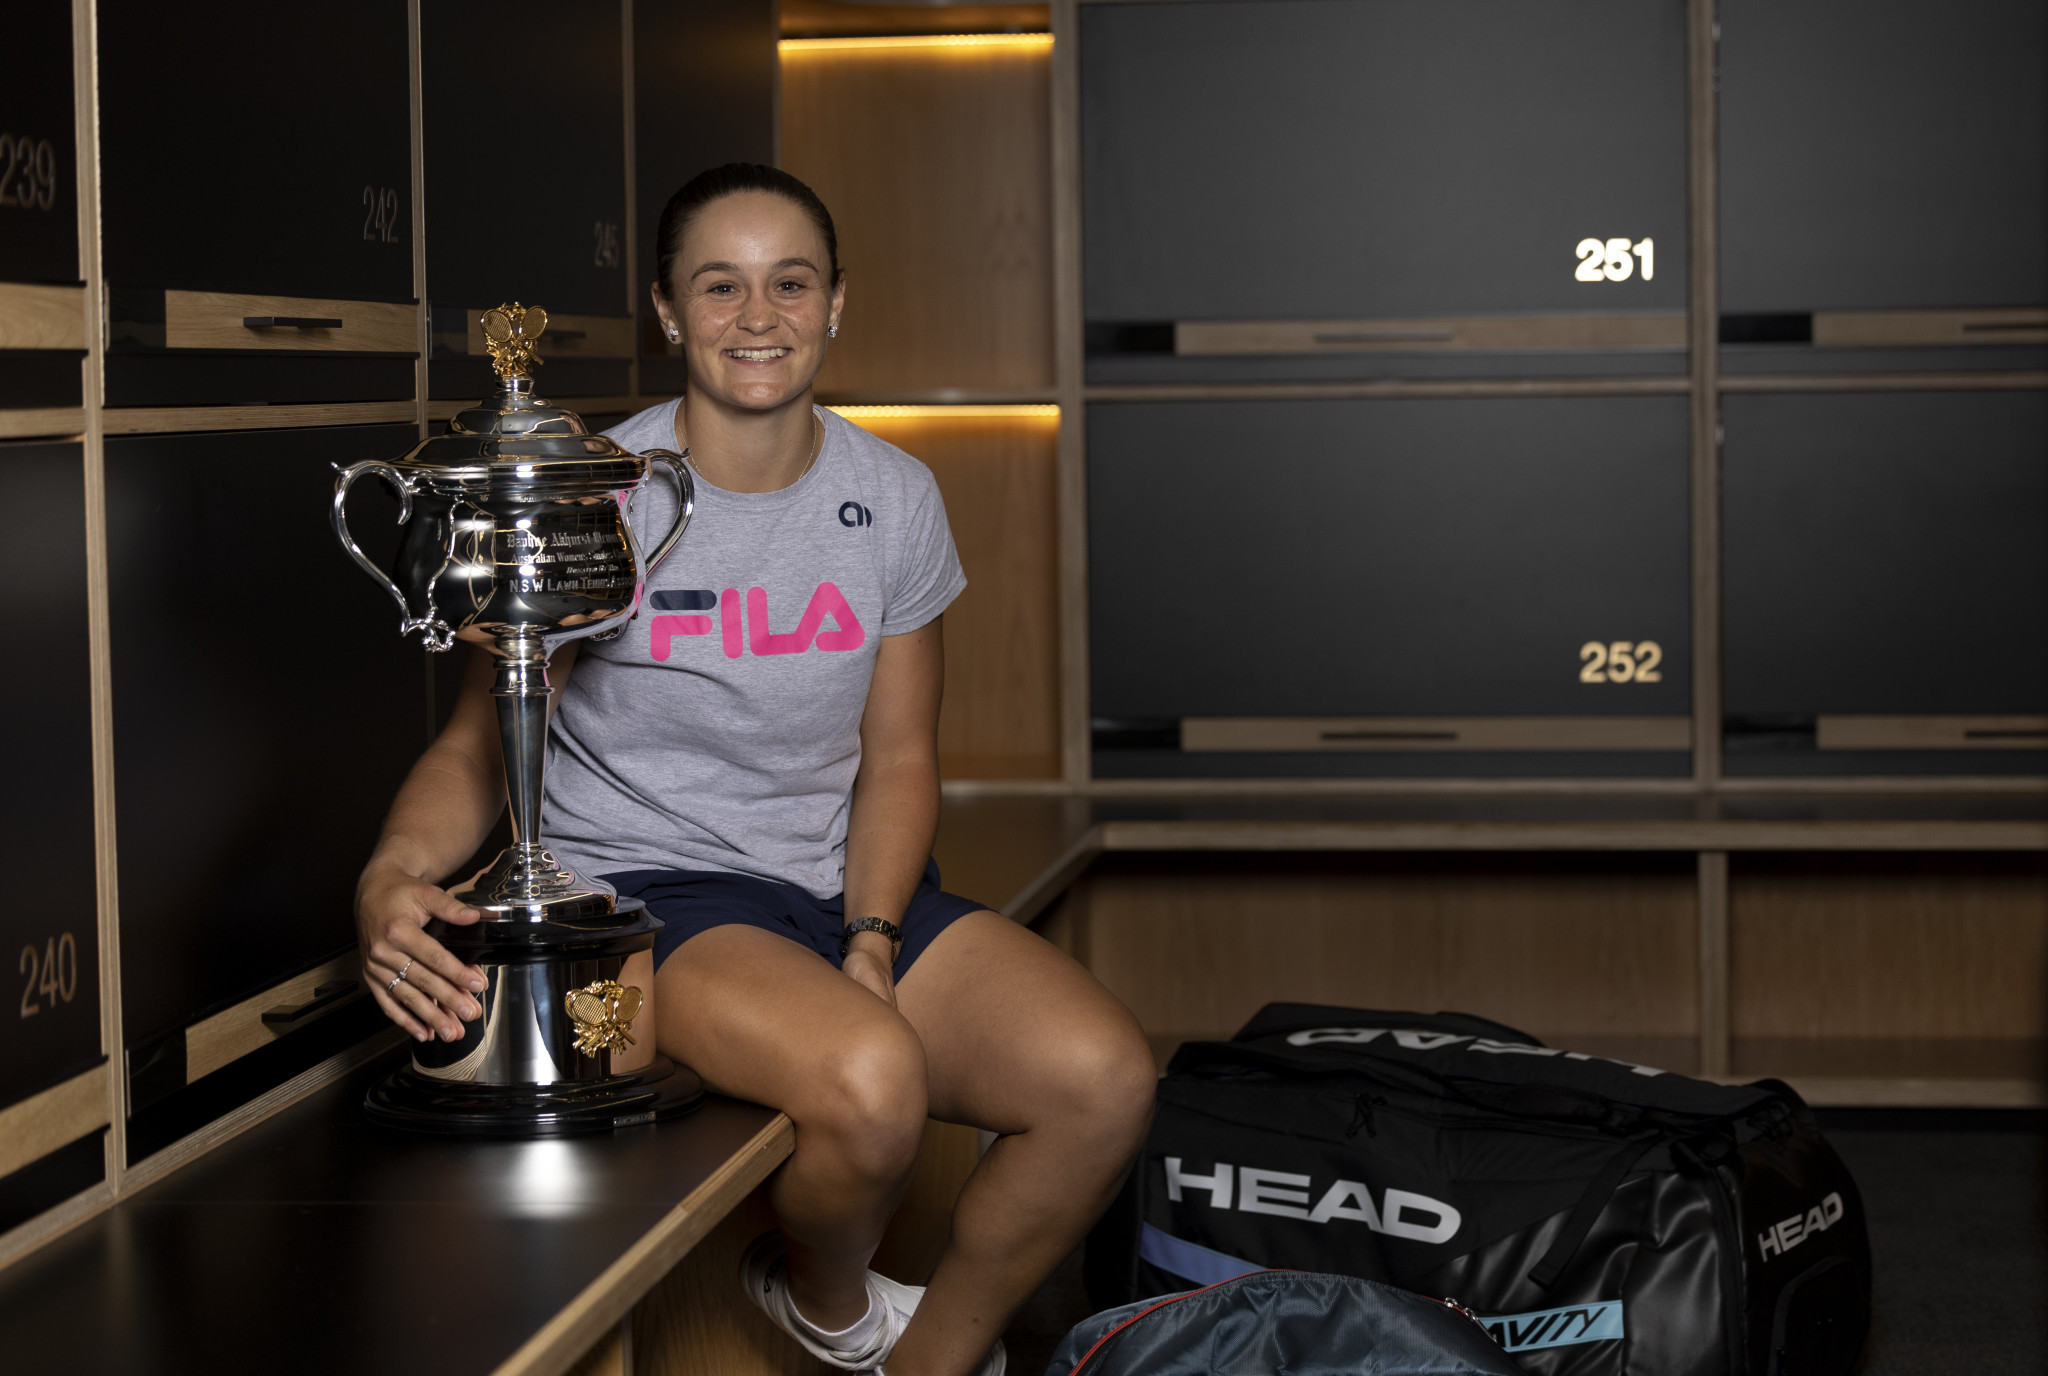 Women’s world number one Barty announces retirement from tennis to "chase other dreams"